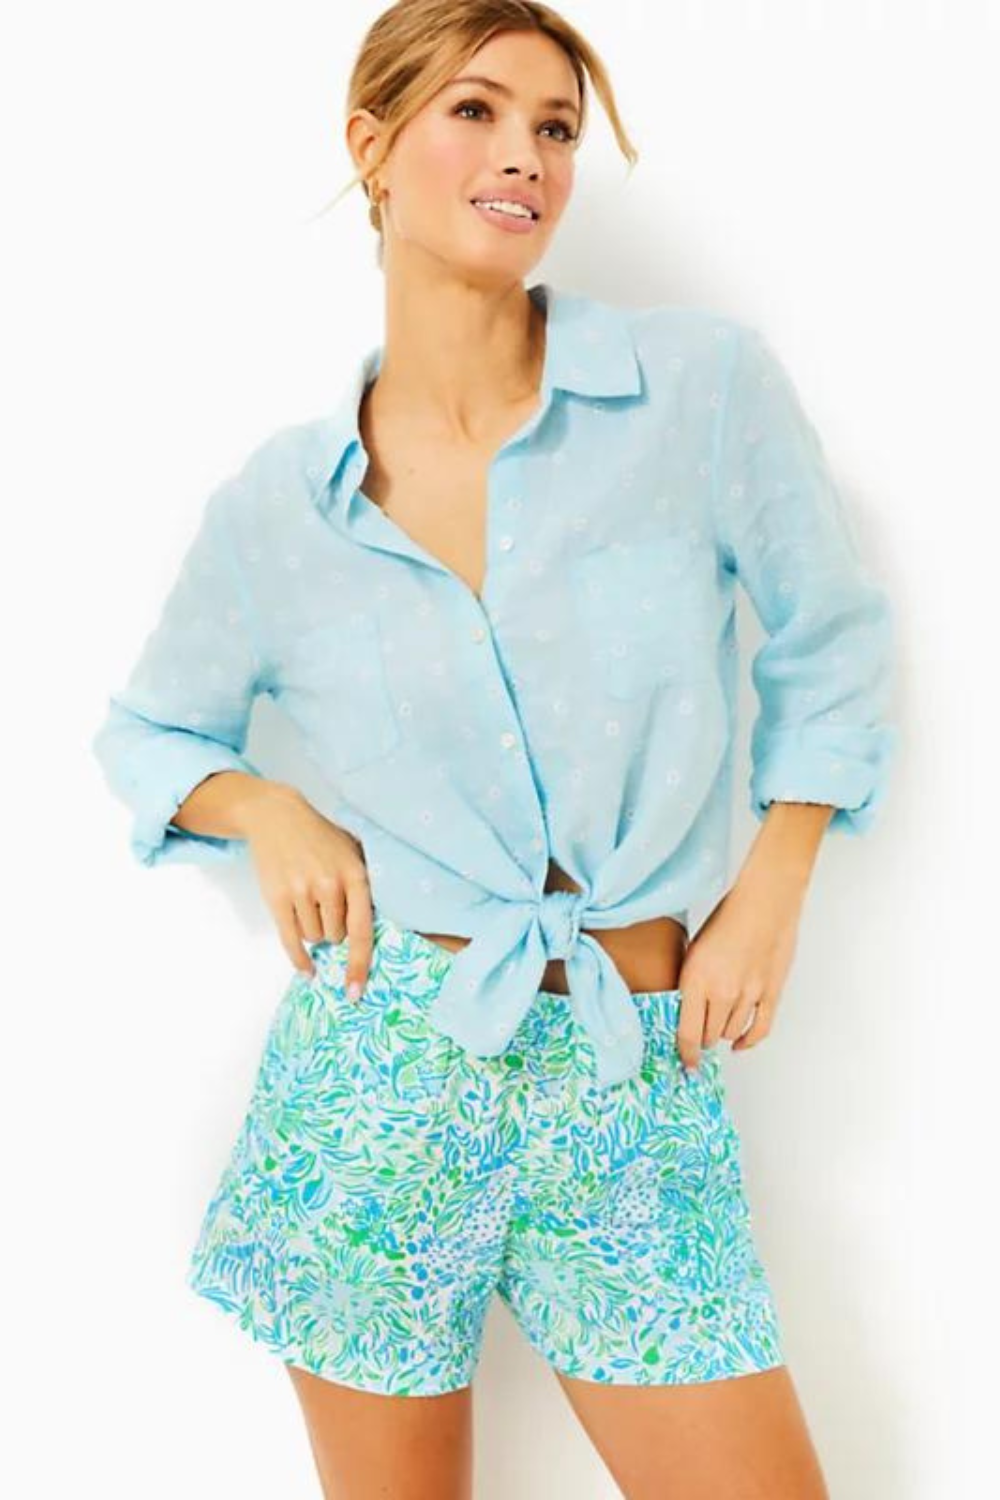 Lilly Pulitzer Lilo Linen Shorts - Dandy Lions